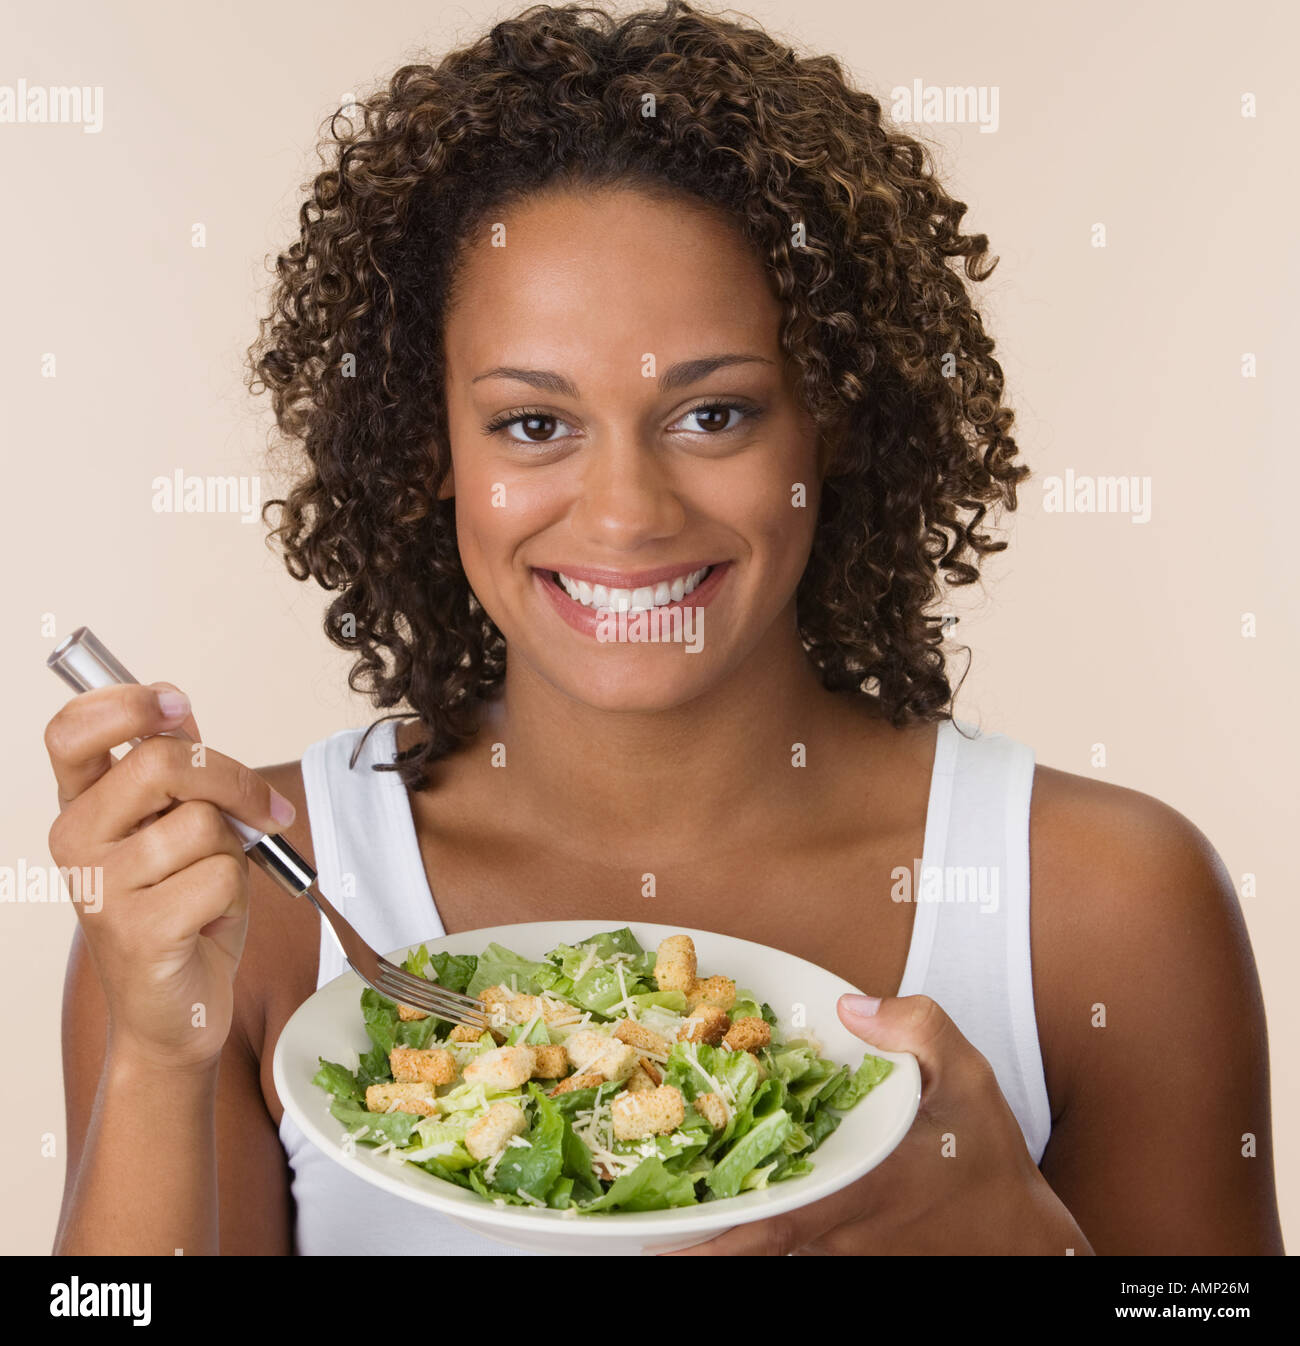 African woman eating salad Stock Photo